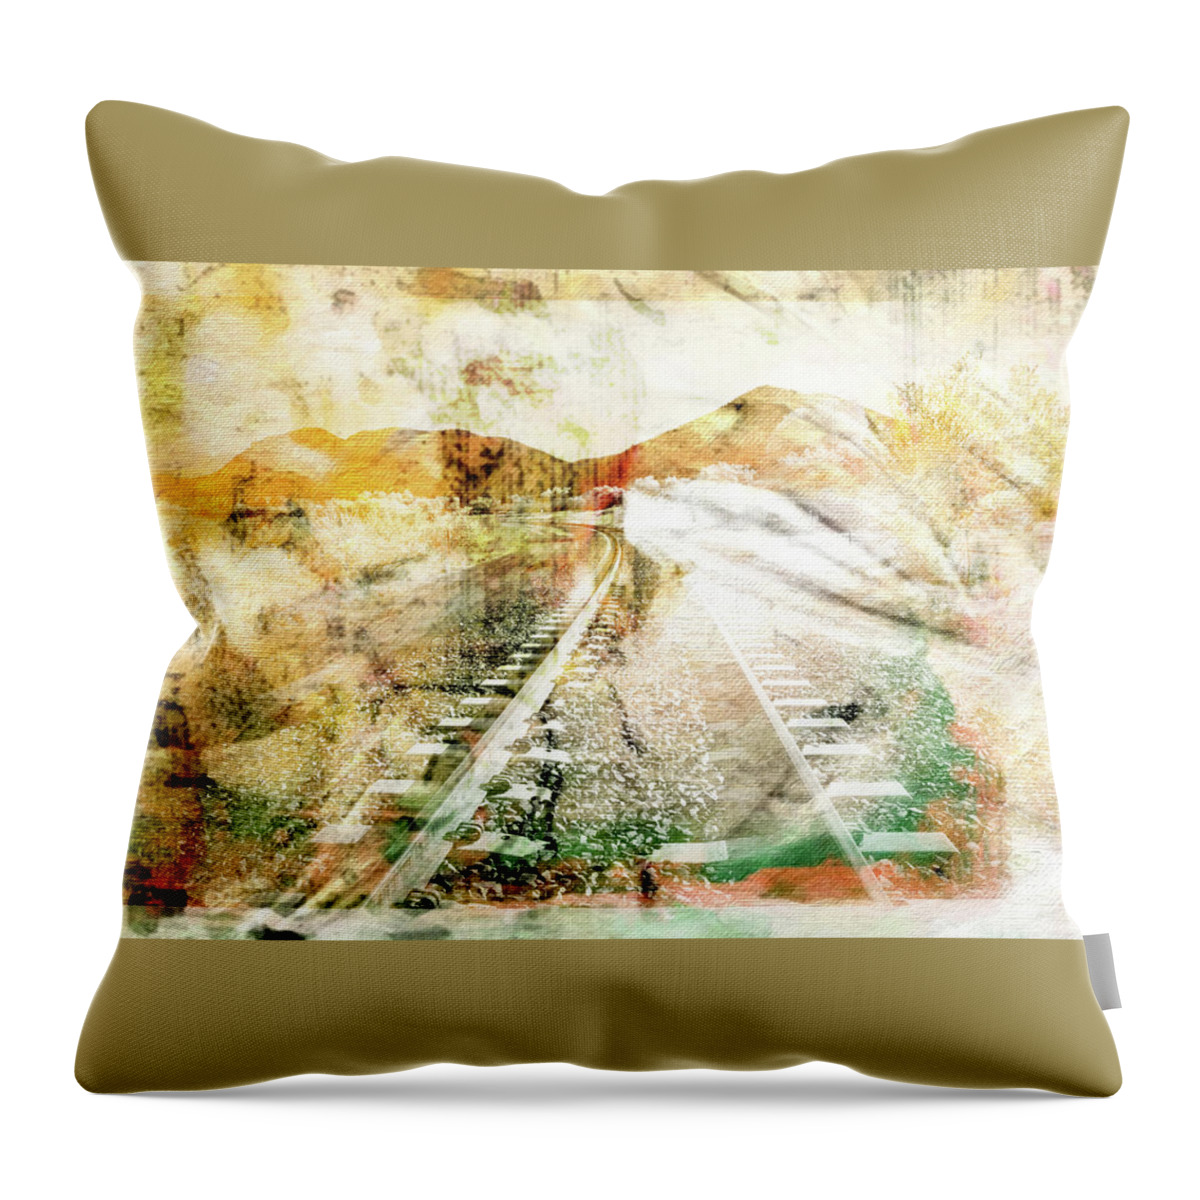 Copper Throw Pillow featuring the mixed media Collage 1 by Priscilla Huber